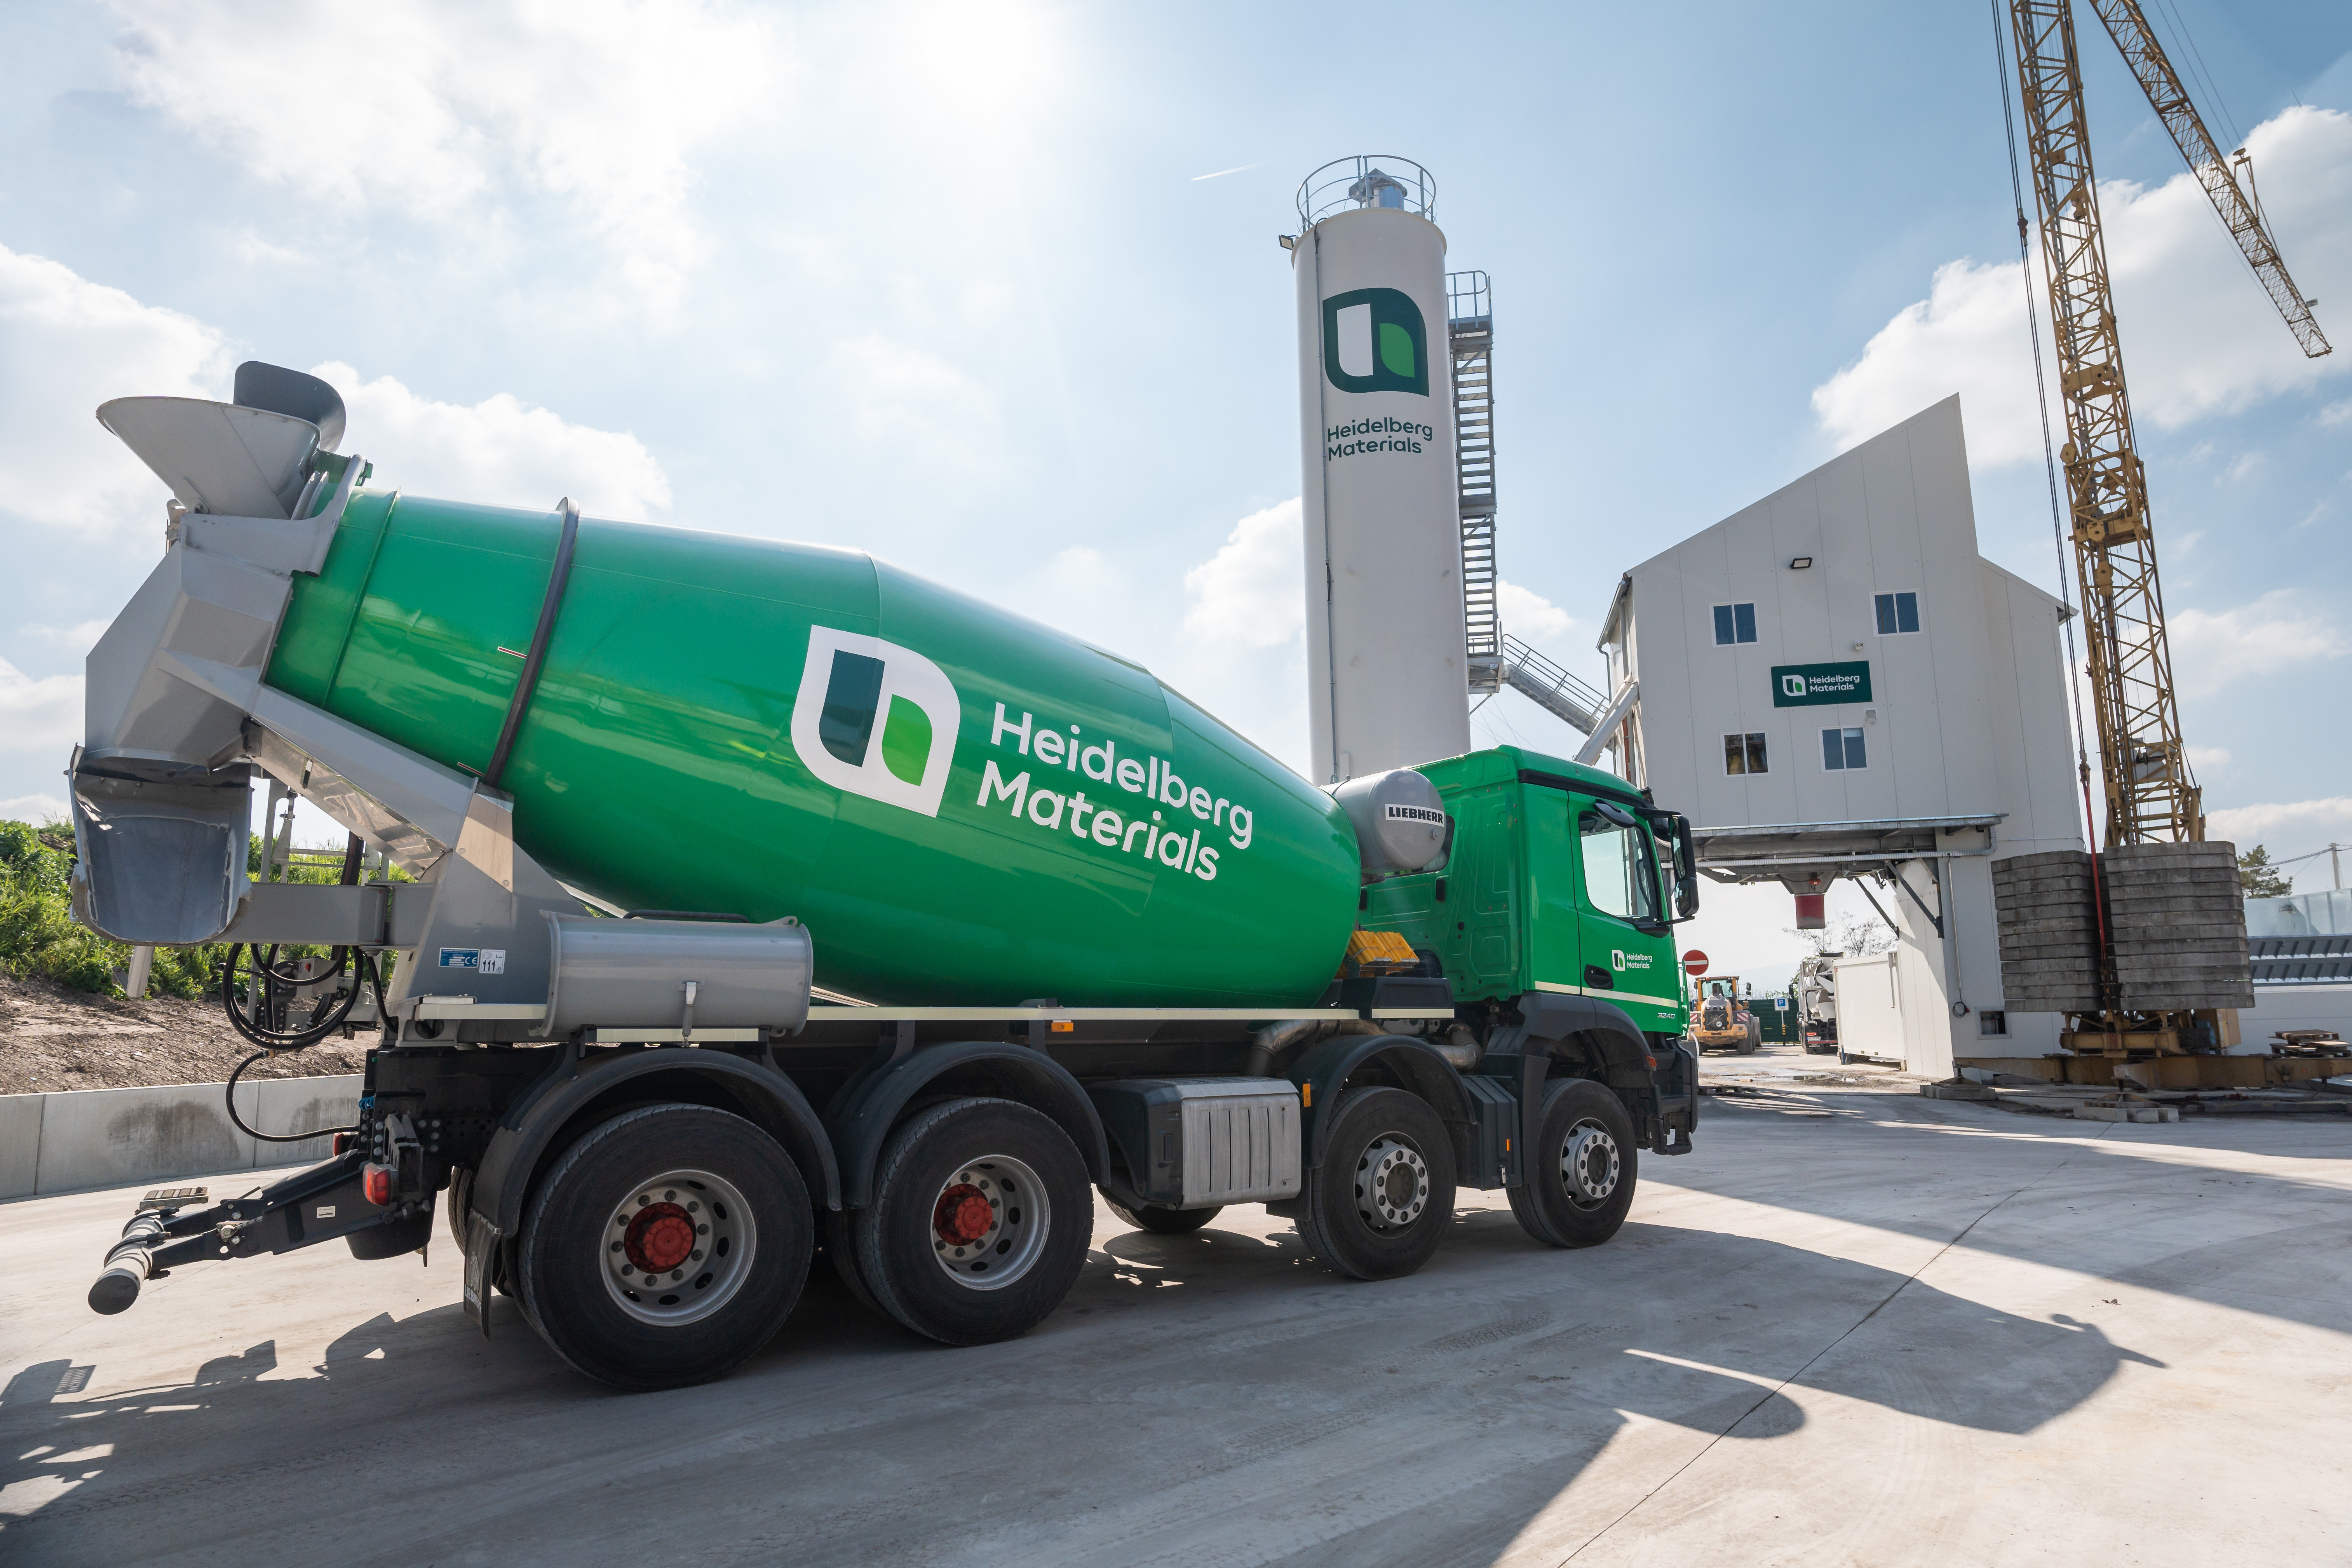 Green ready-mix truck in front of a silo, an industrial building and a crane